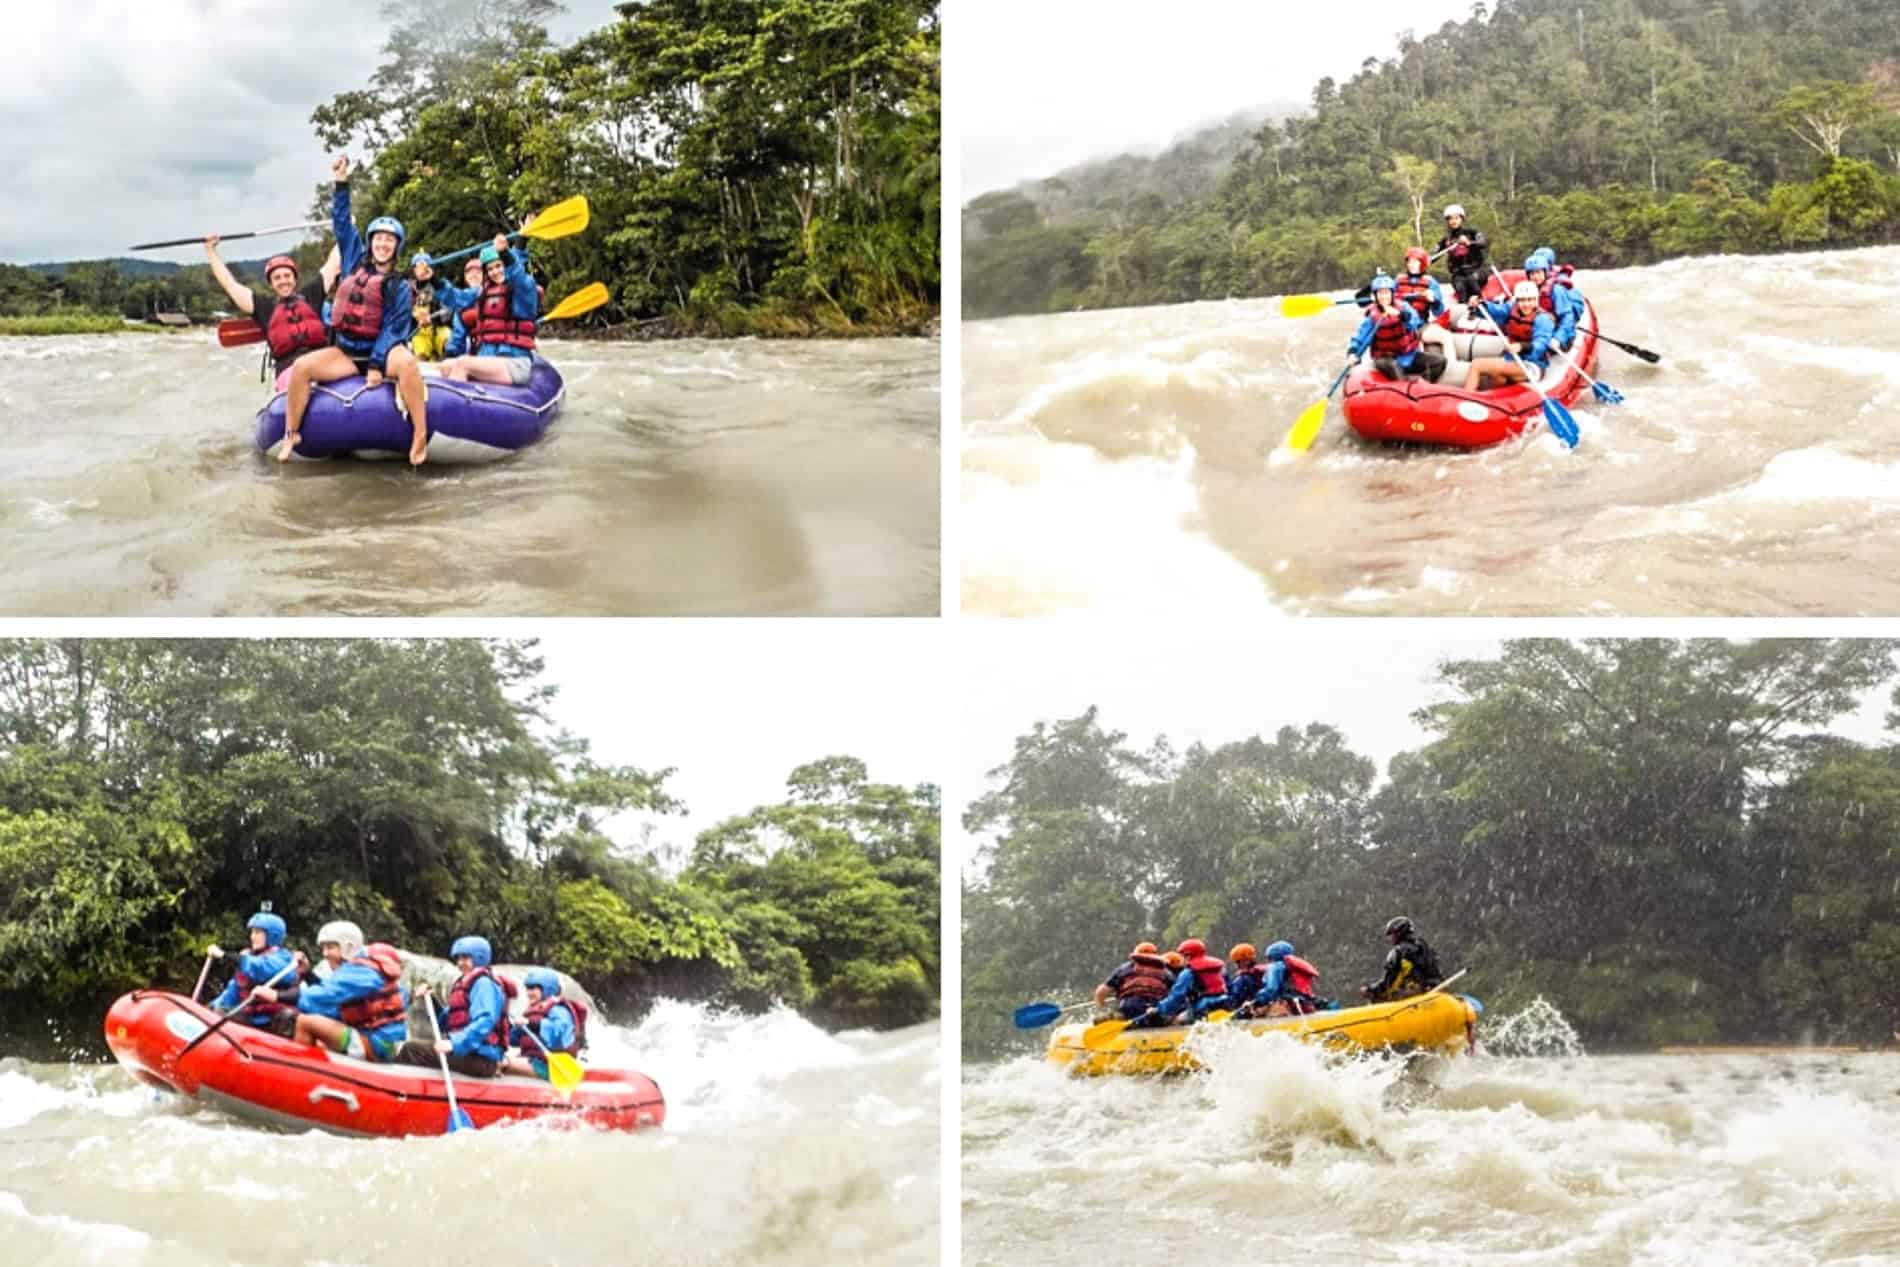 Four images showing people water rafting on the fast flowing river in the Ecuador Amazon Rainforest.